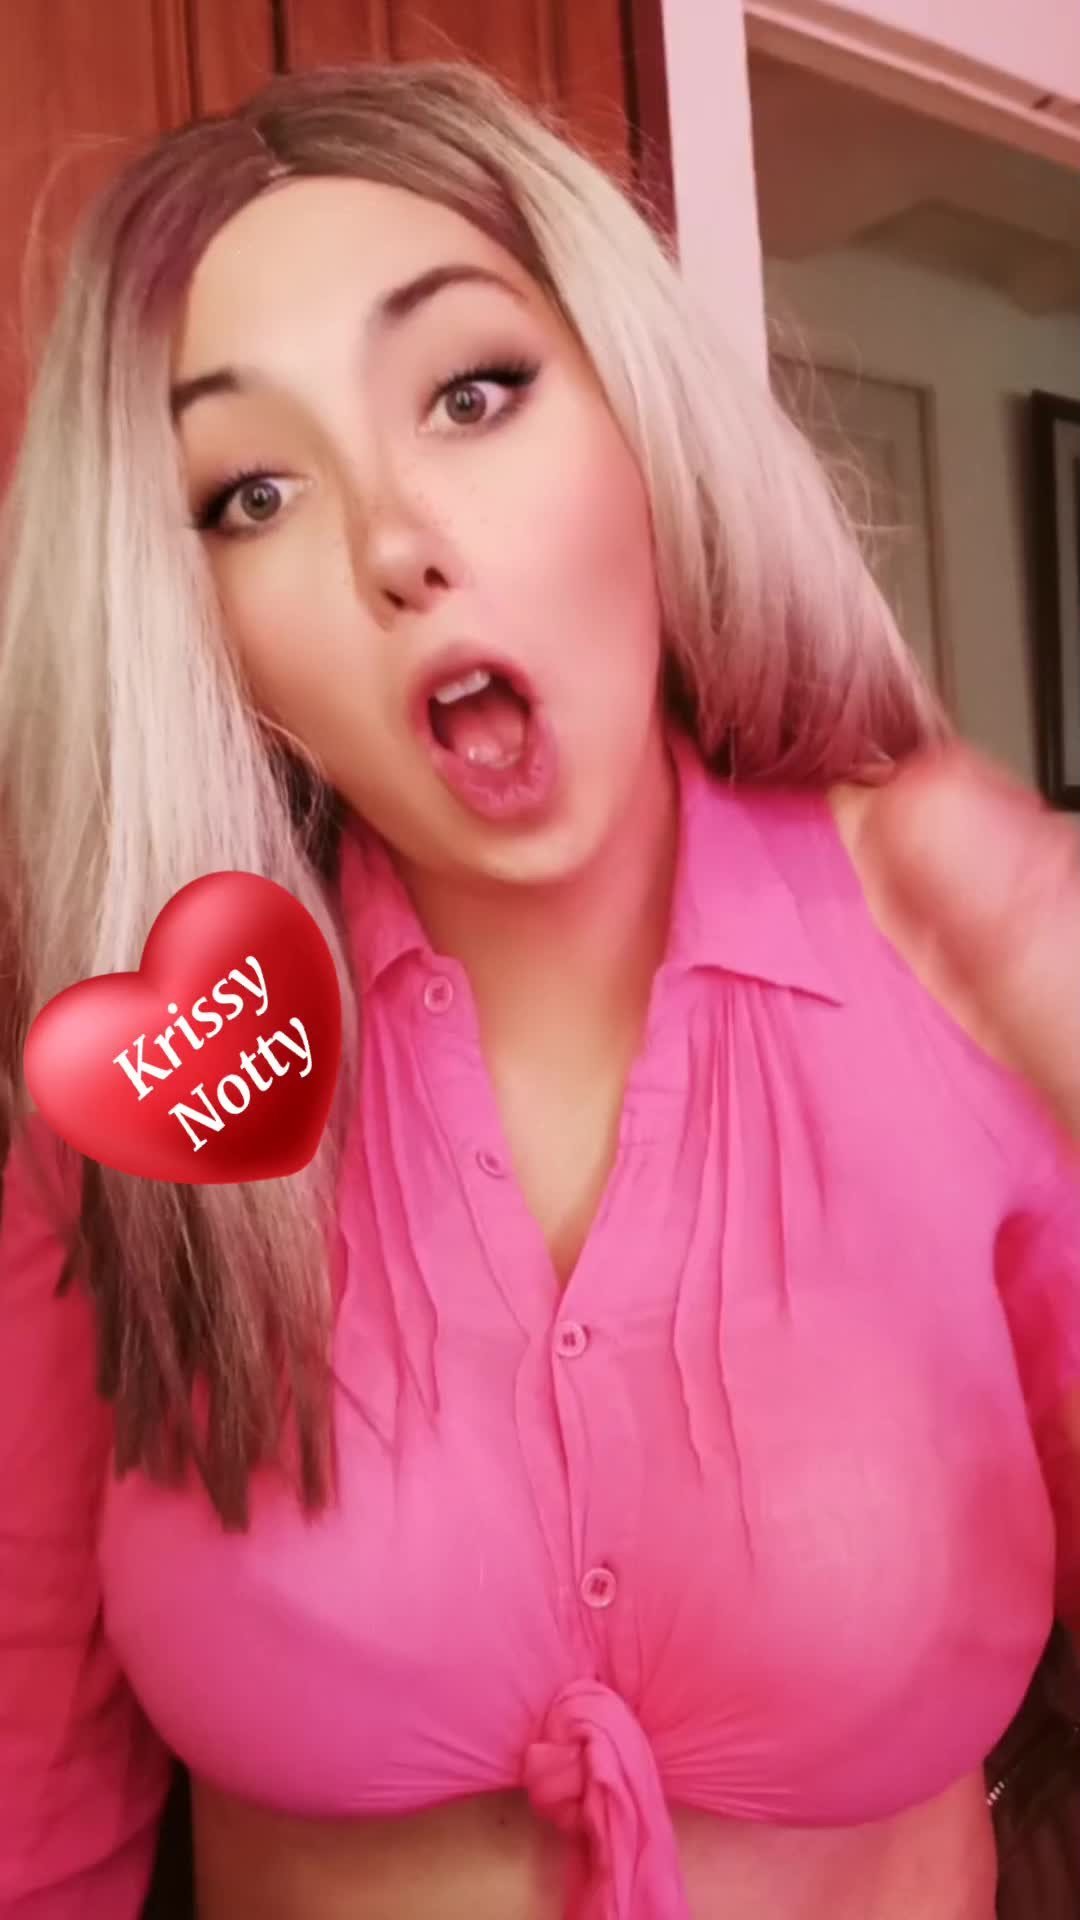 Video post by KrissyNotty